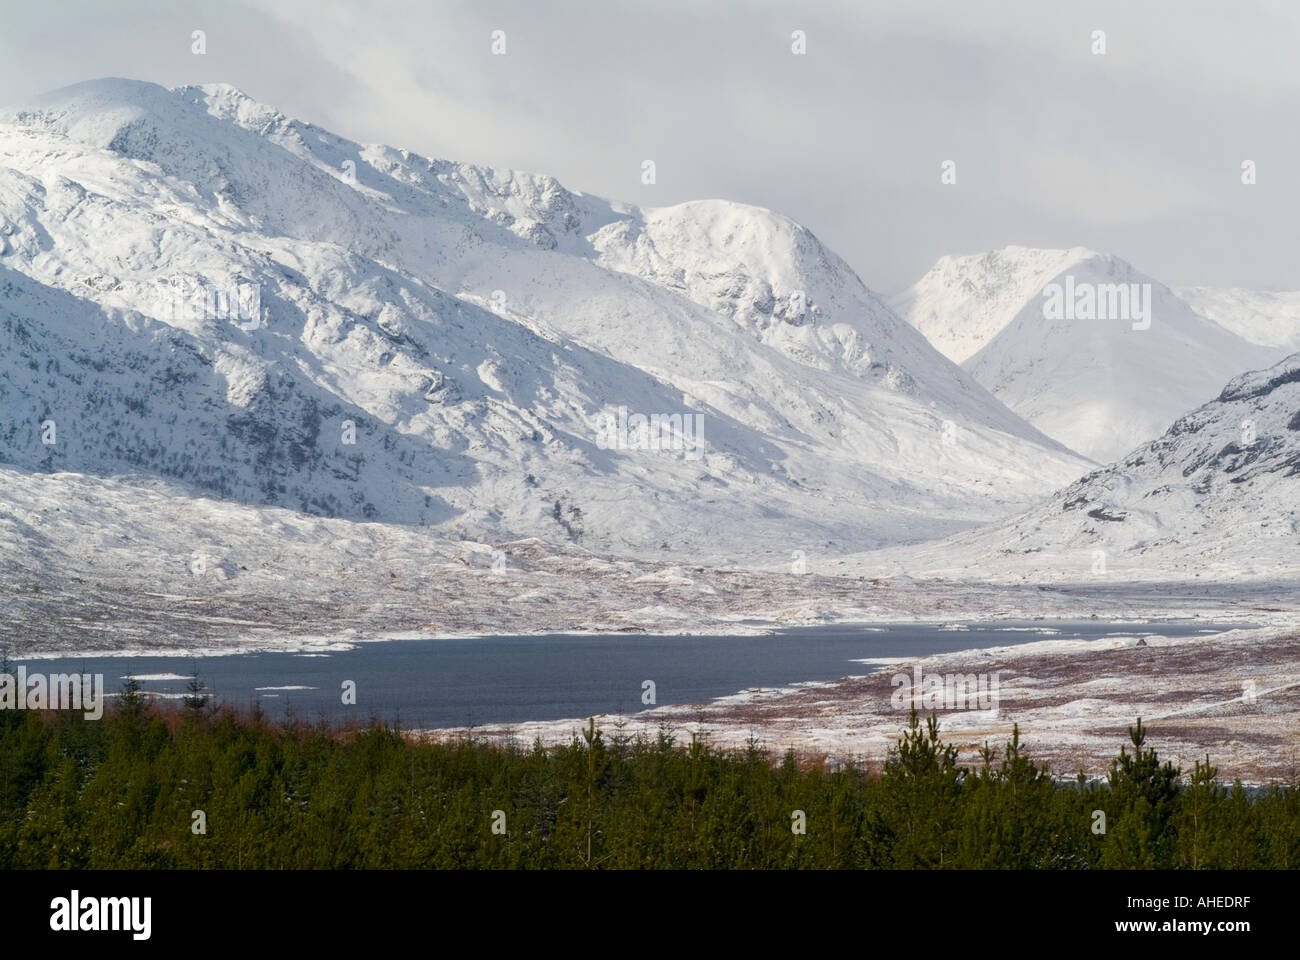 A dramatic view across a pine plantation to a scottish loch surrounded by snow covered mountains in bright winter sunlight Stock Photo